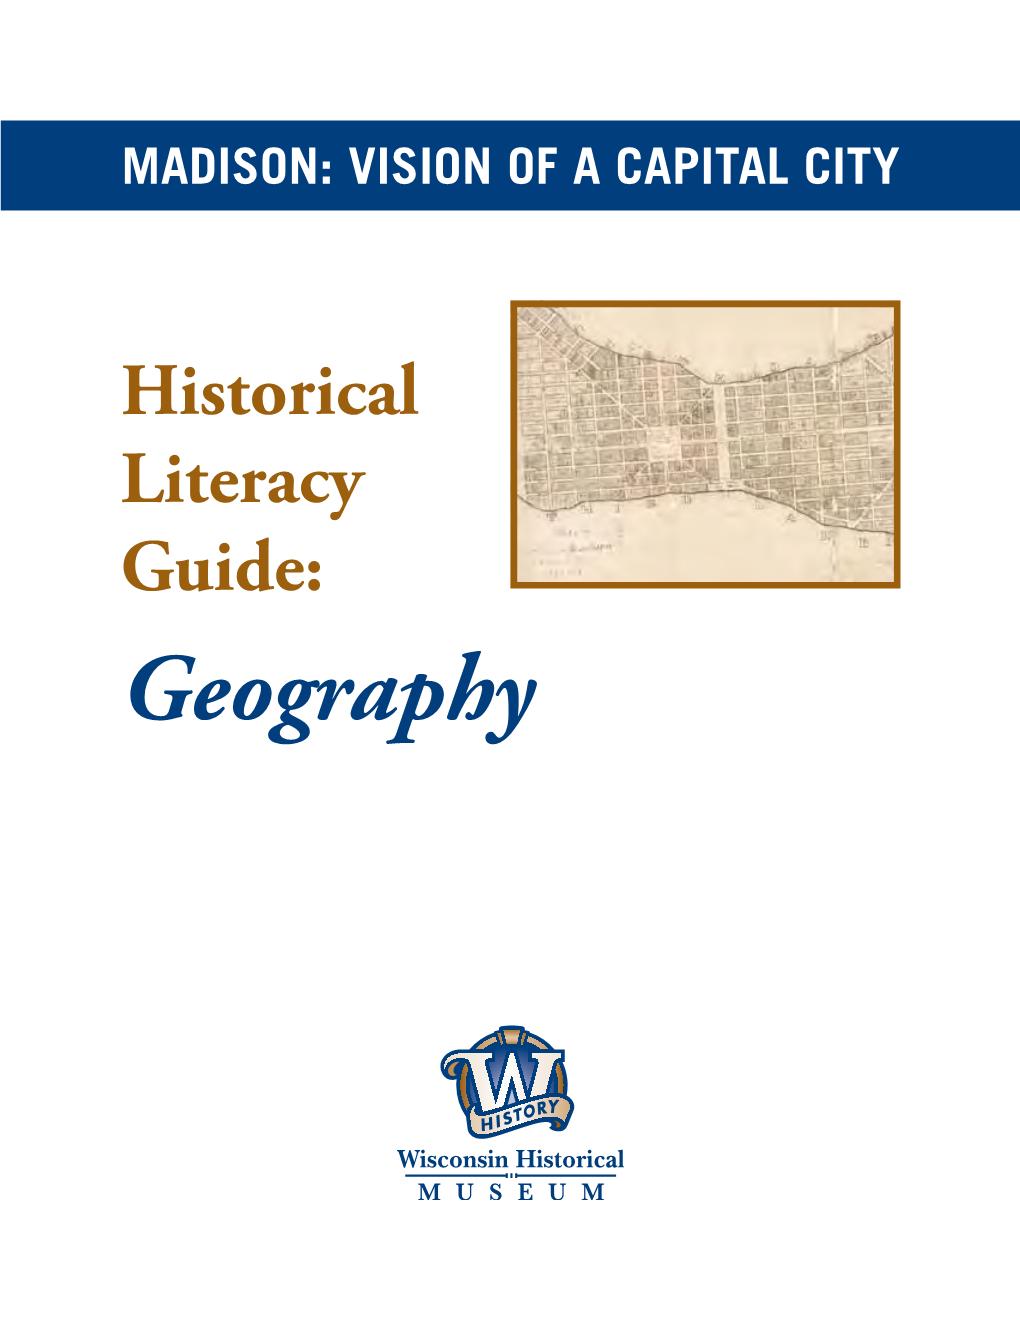 Madison: Vision of a Capital City